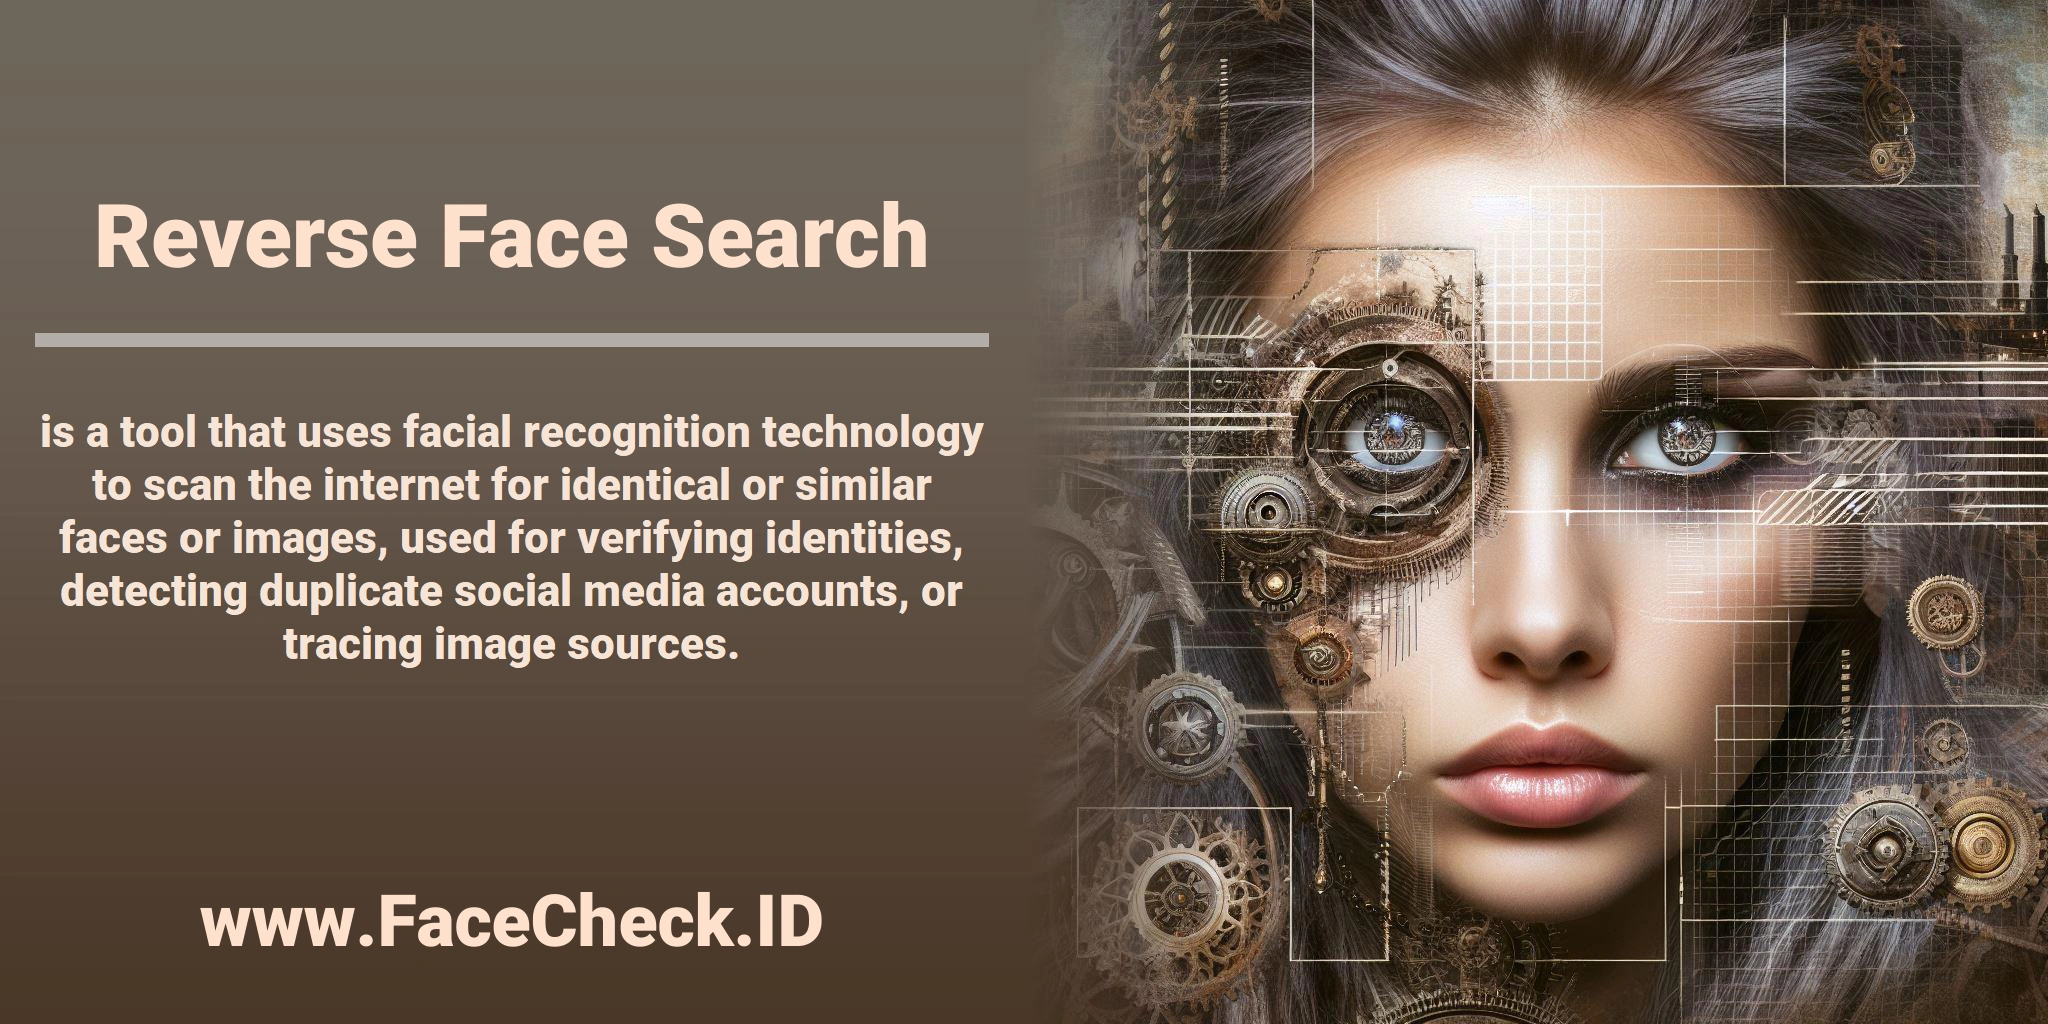 <b>Reverse Face Search</b> is a tool that uses facial recognition technology to scan the internet for identical or similar faces or images, used for verifying identities, detecting duplicate social media accounts, or tracing image sources.